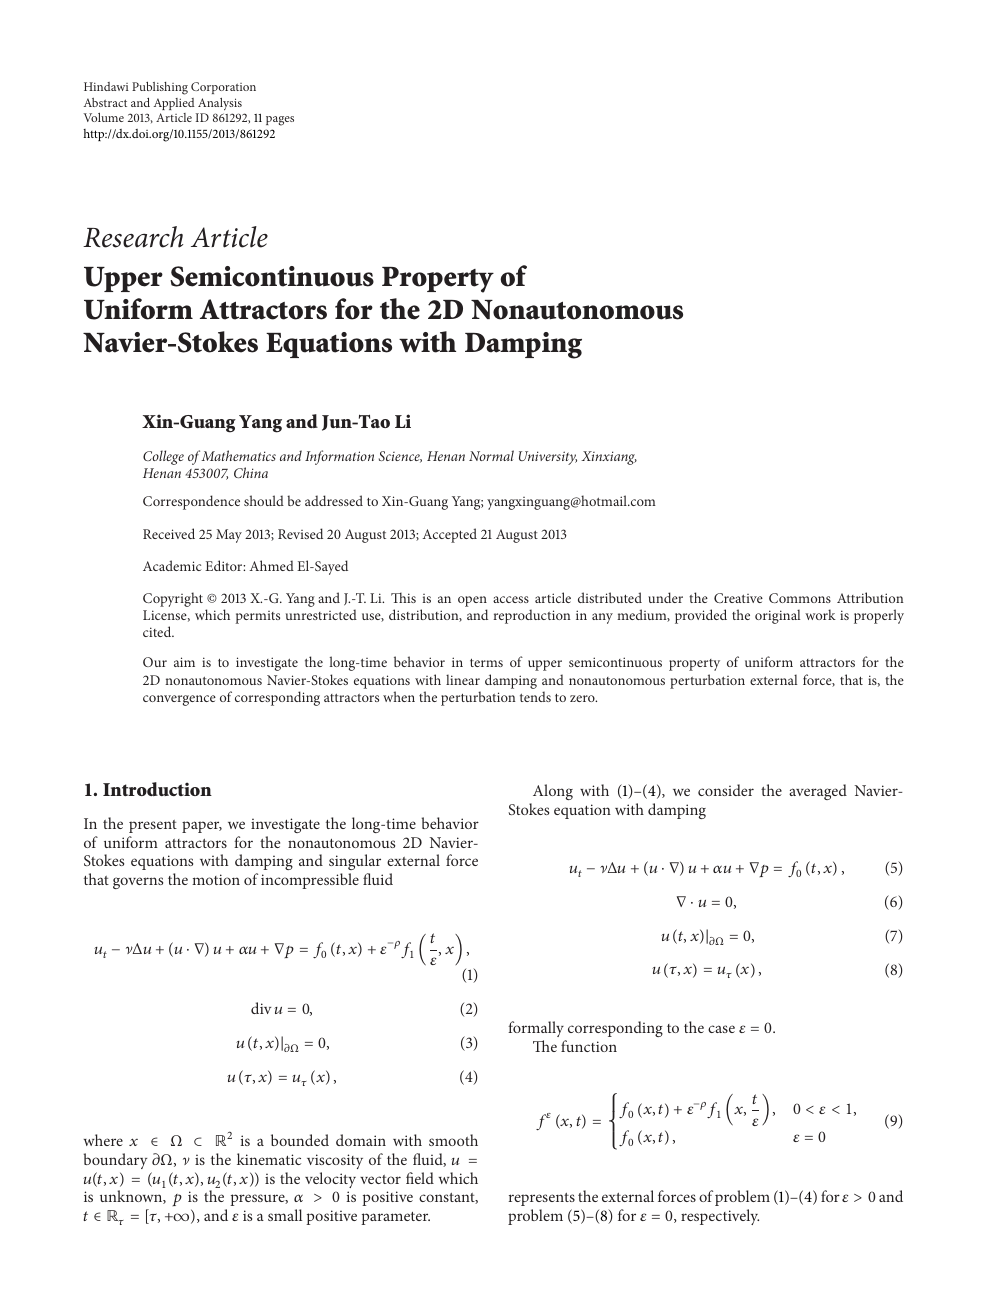 Upper Semicontinuous Property Of Uniform Attractors For The 2d Nonautonomous Navier Stokes Equations With Damping Topic Of Research Paper In Mathematics Download Scholarly Article Pdf And Read For Free On Cyberleninka Open